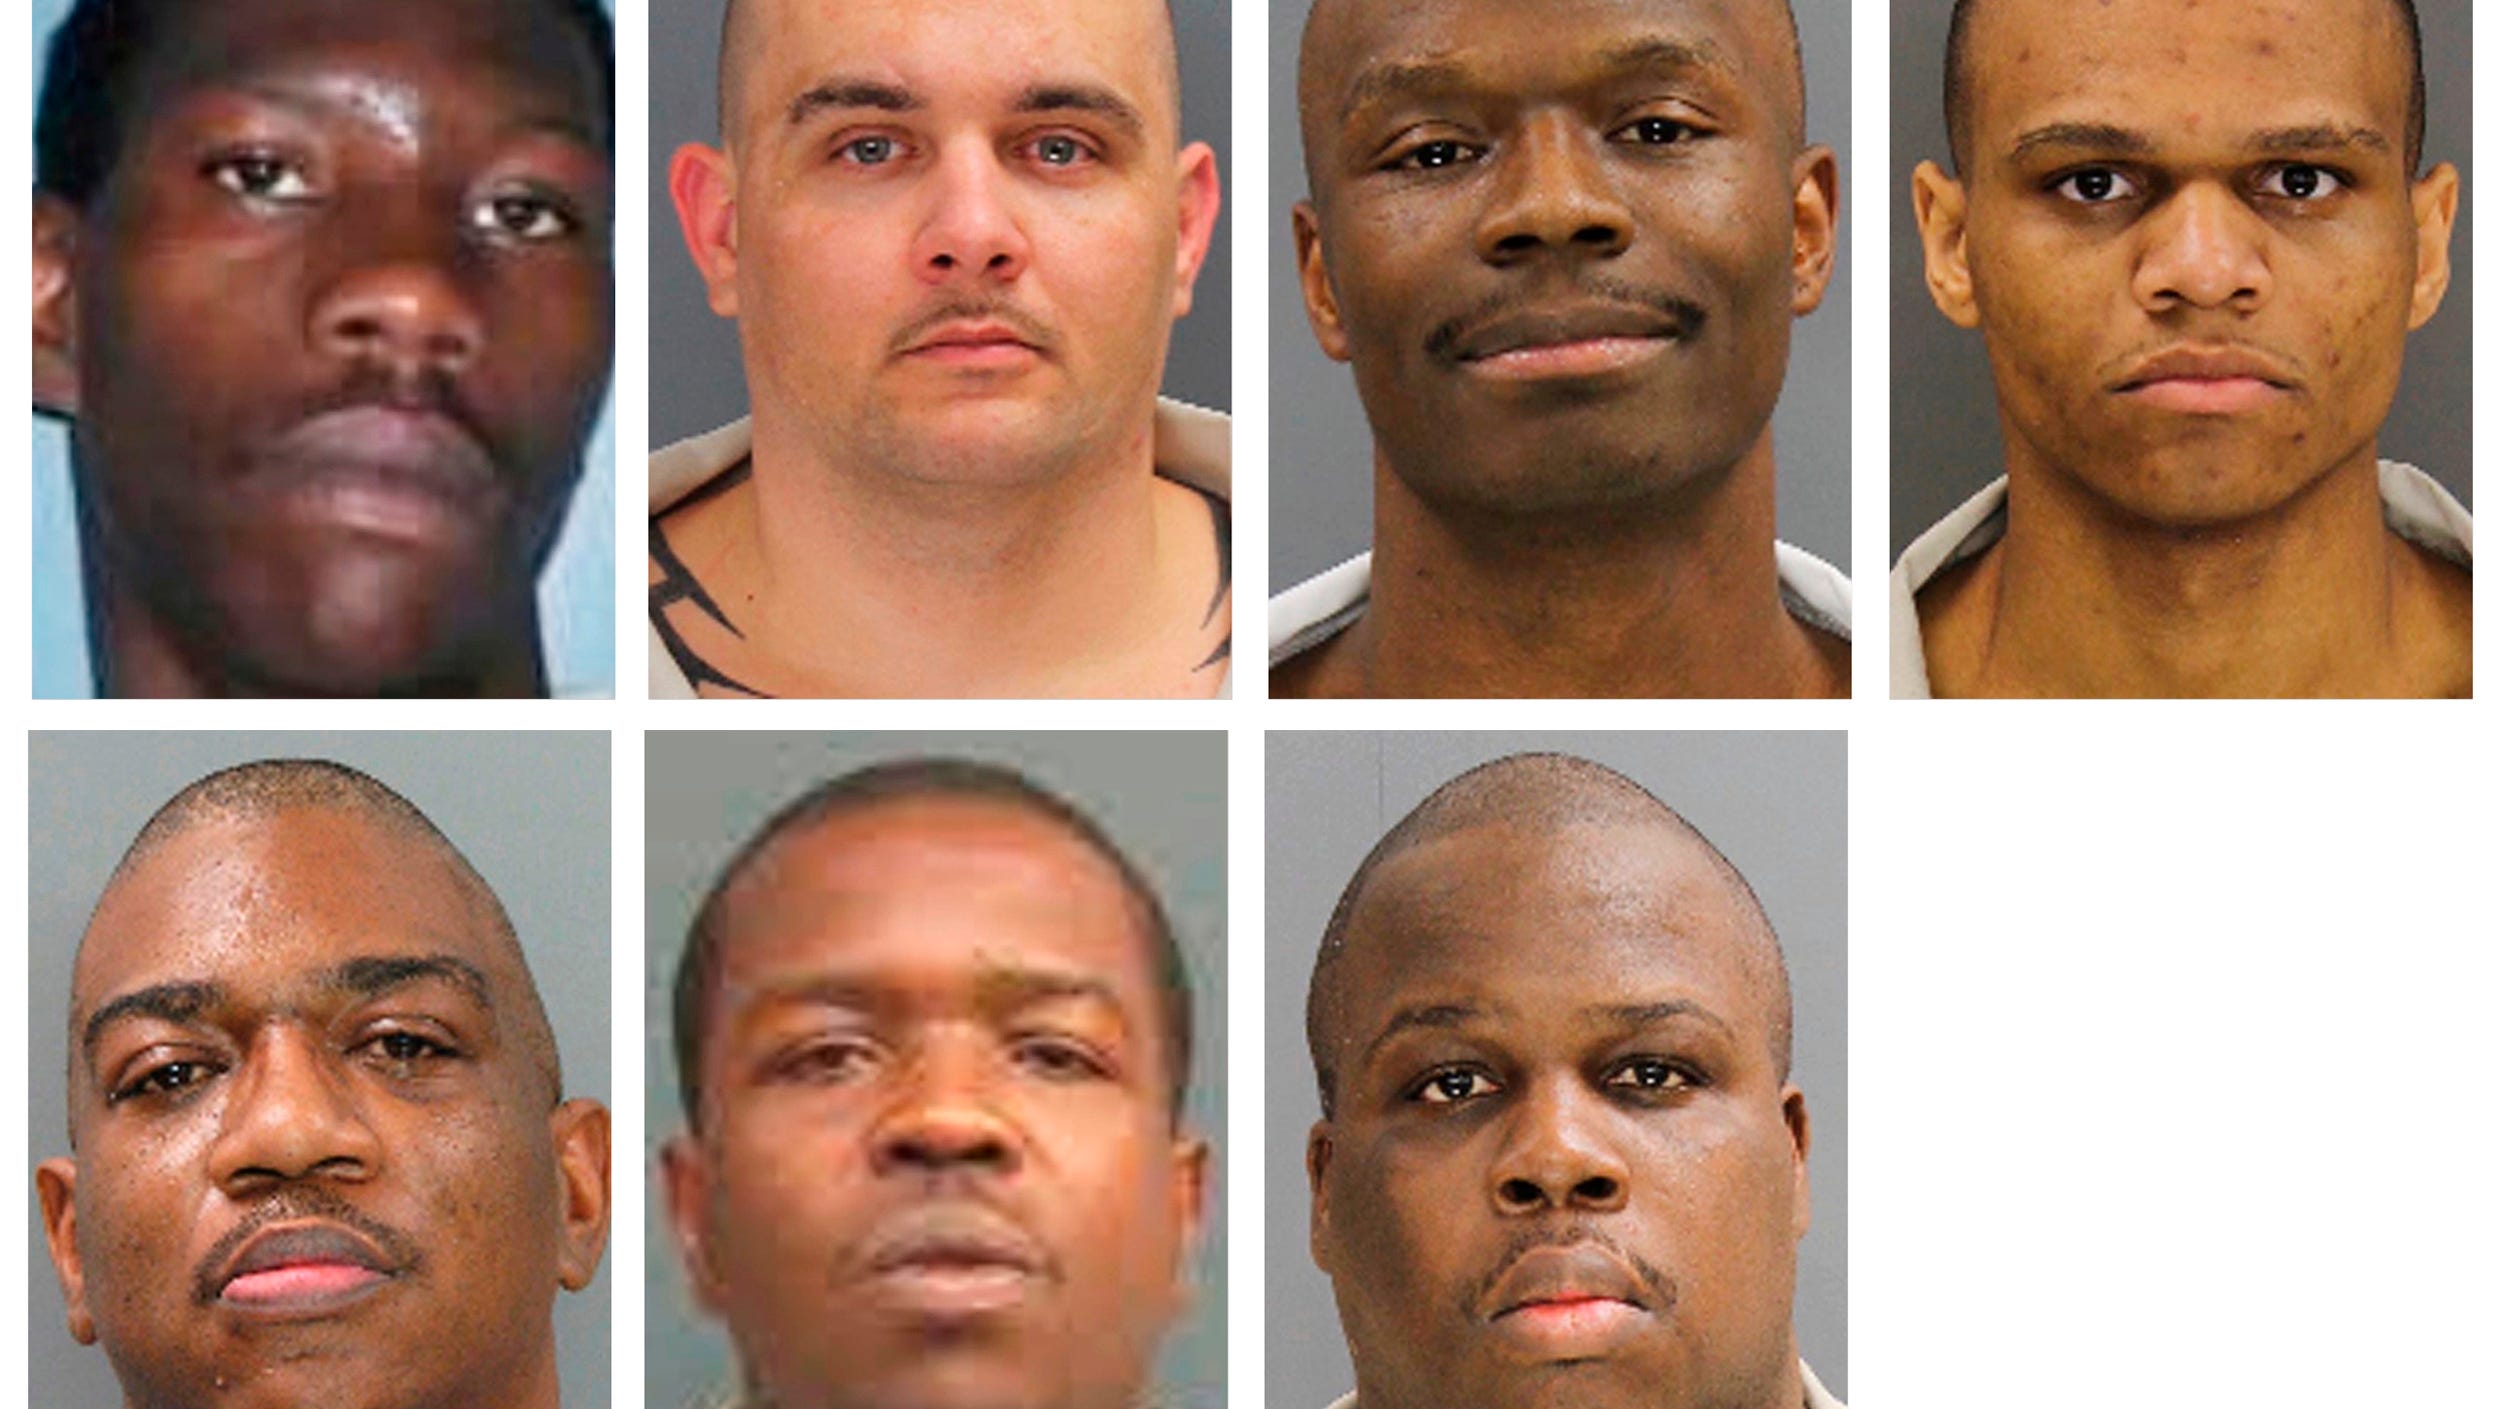 Lee Correctional prison riot: Cause of death for inmates released